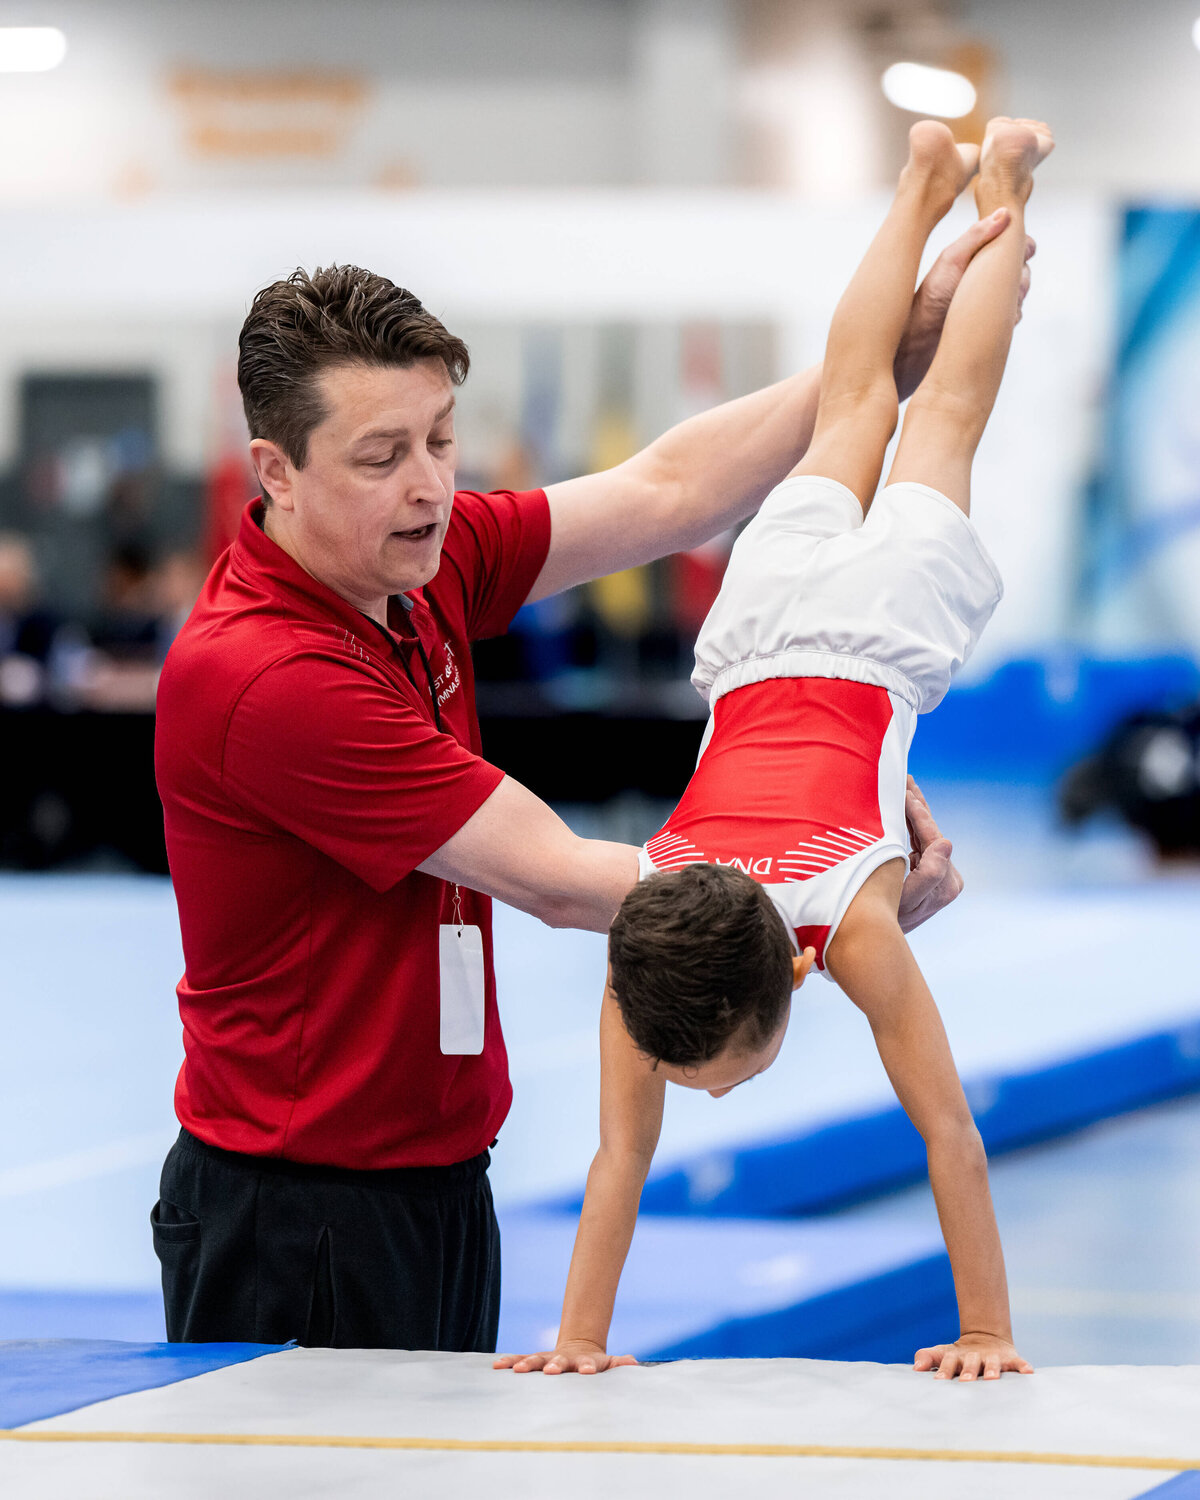 Photo by Luke O'Geil taken at the 2023 inaugural Grizzly Classic men's artistic gymnastics competitionA1_06030